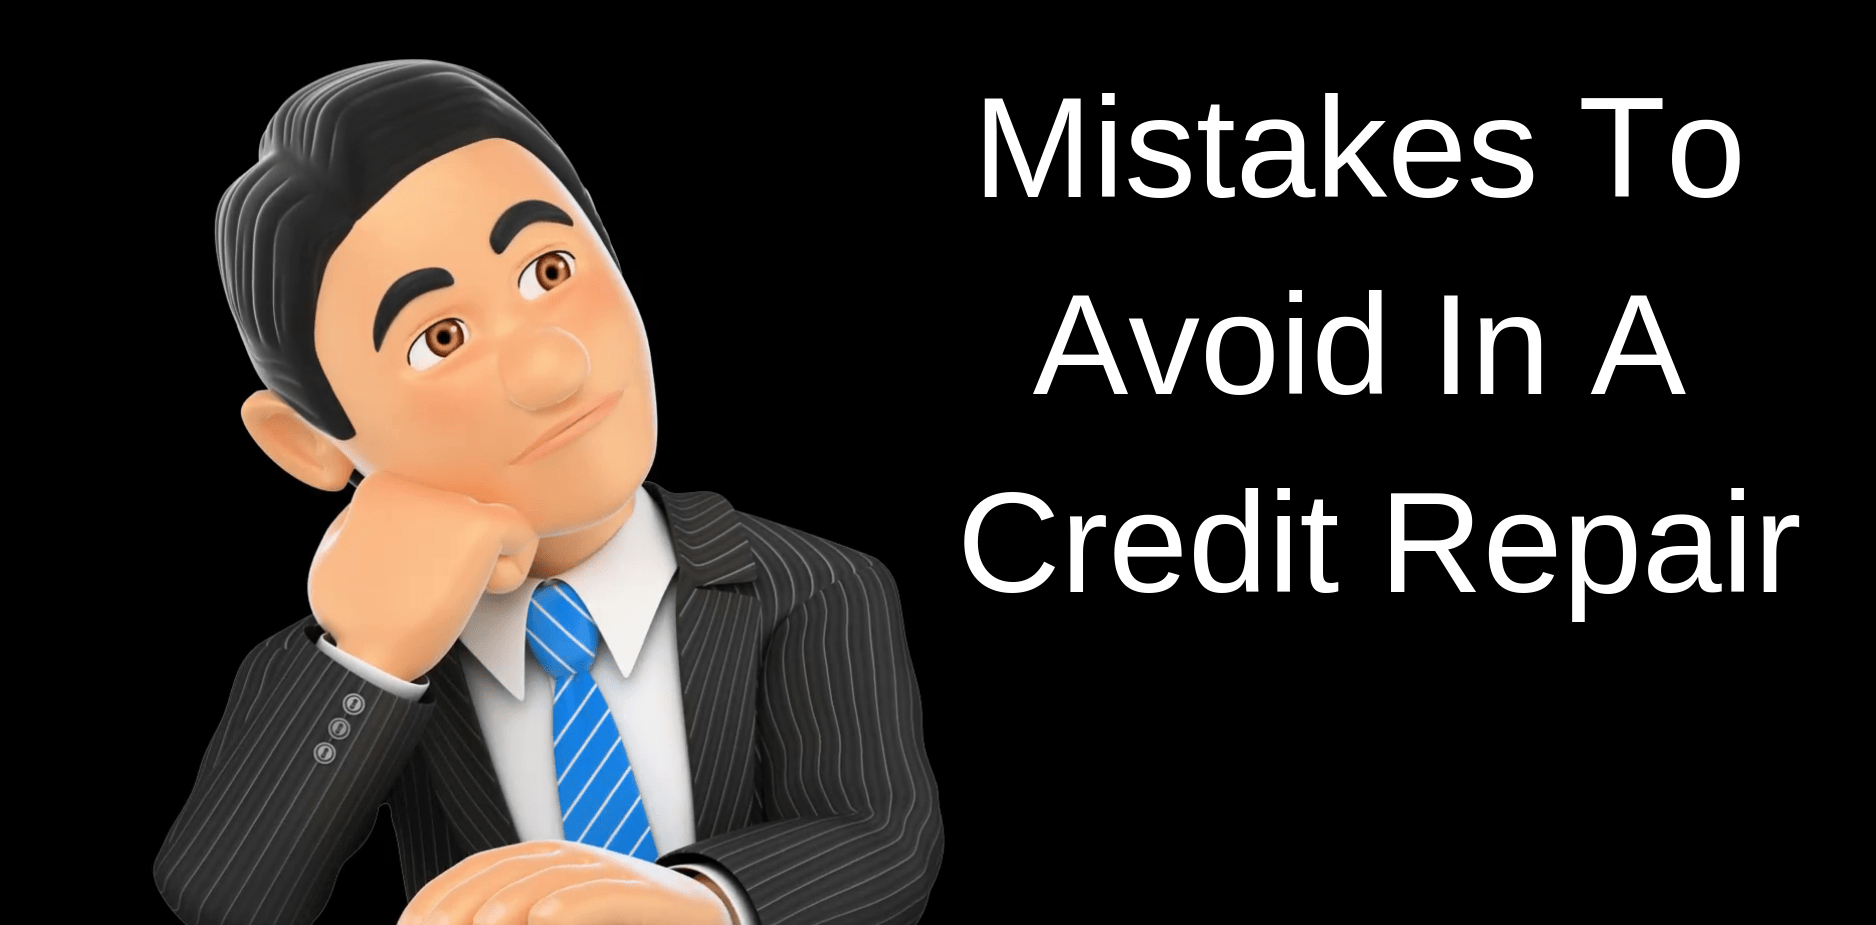 Mistakes To Avoid In A Credit Repair